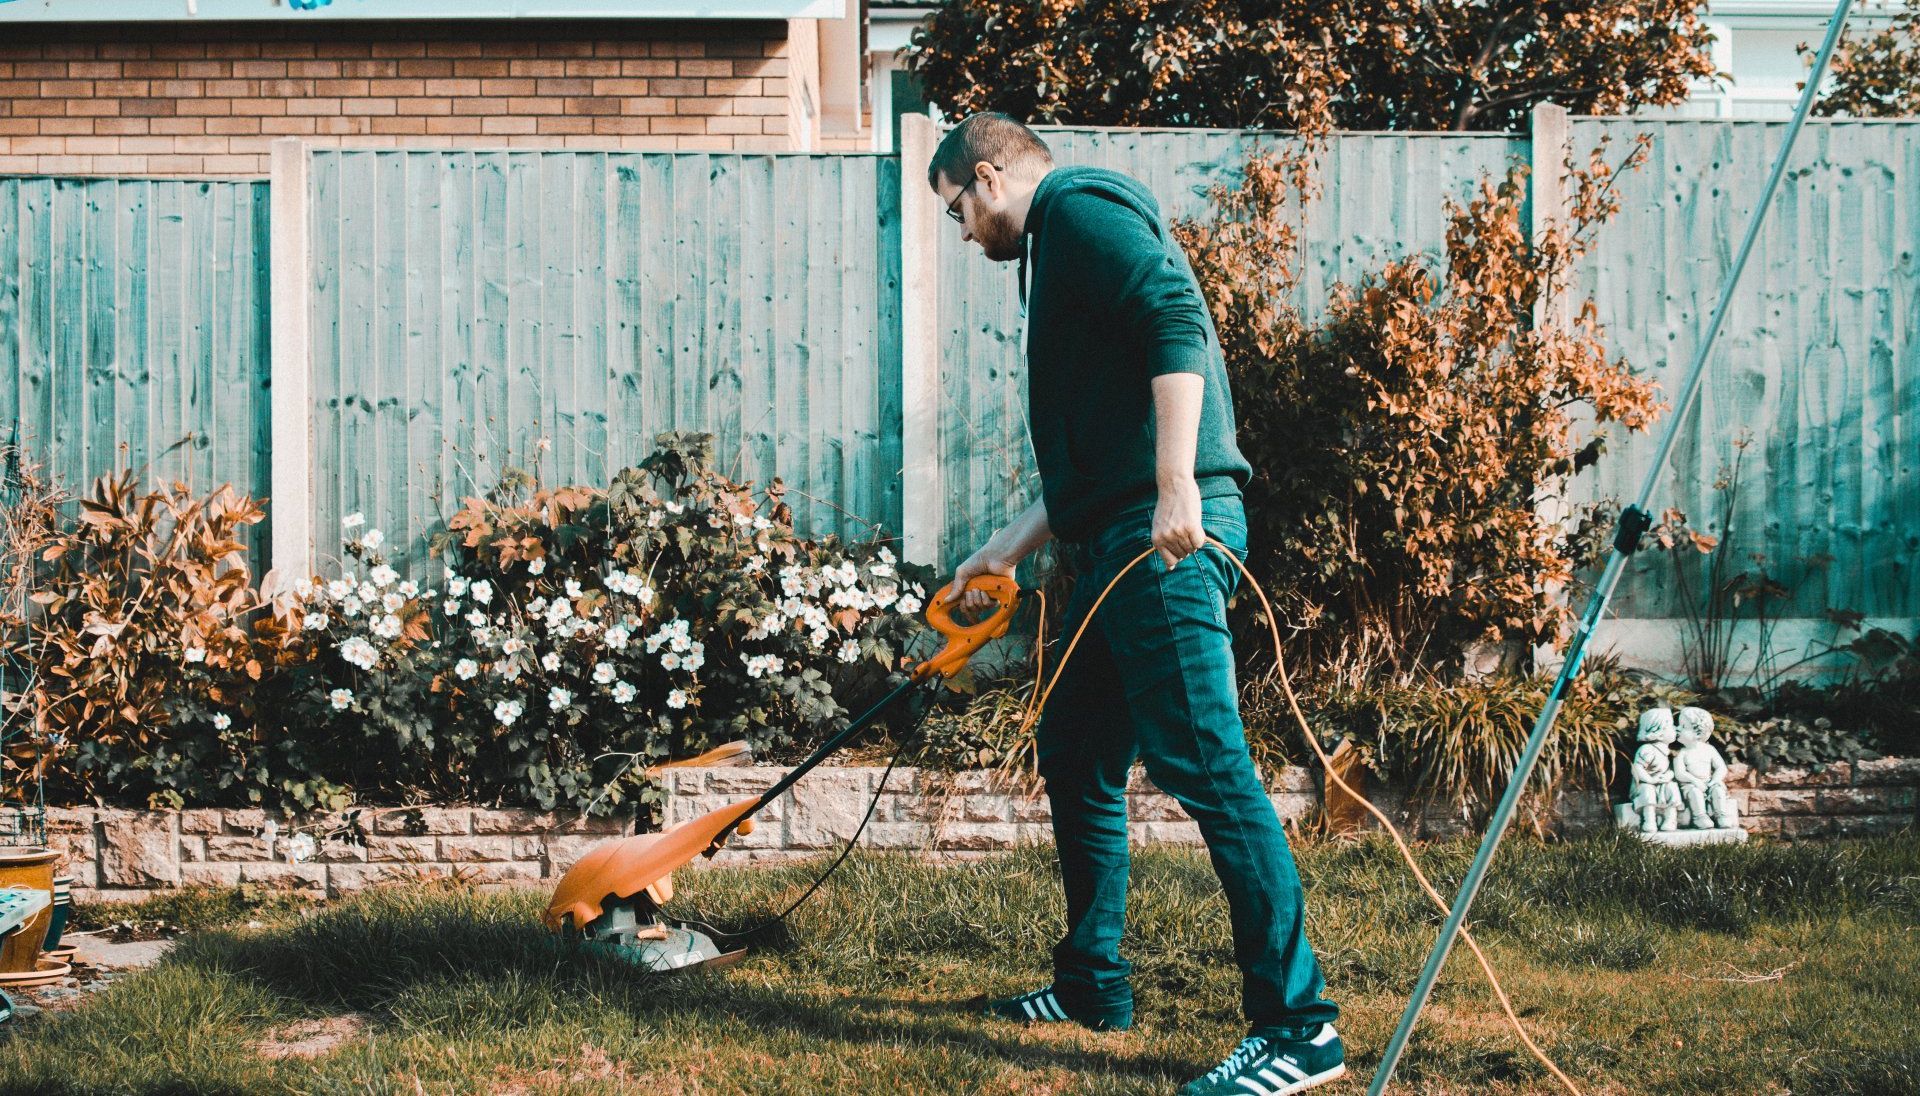 Image of a man trimming the lawn